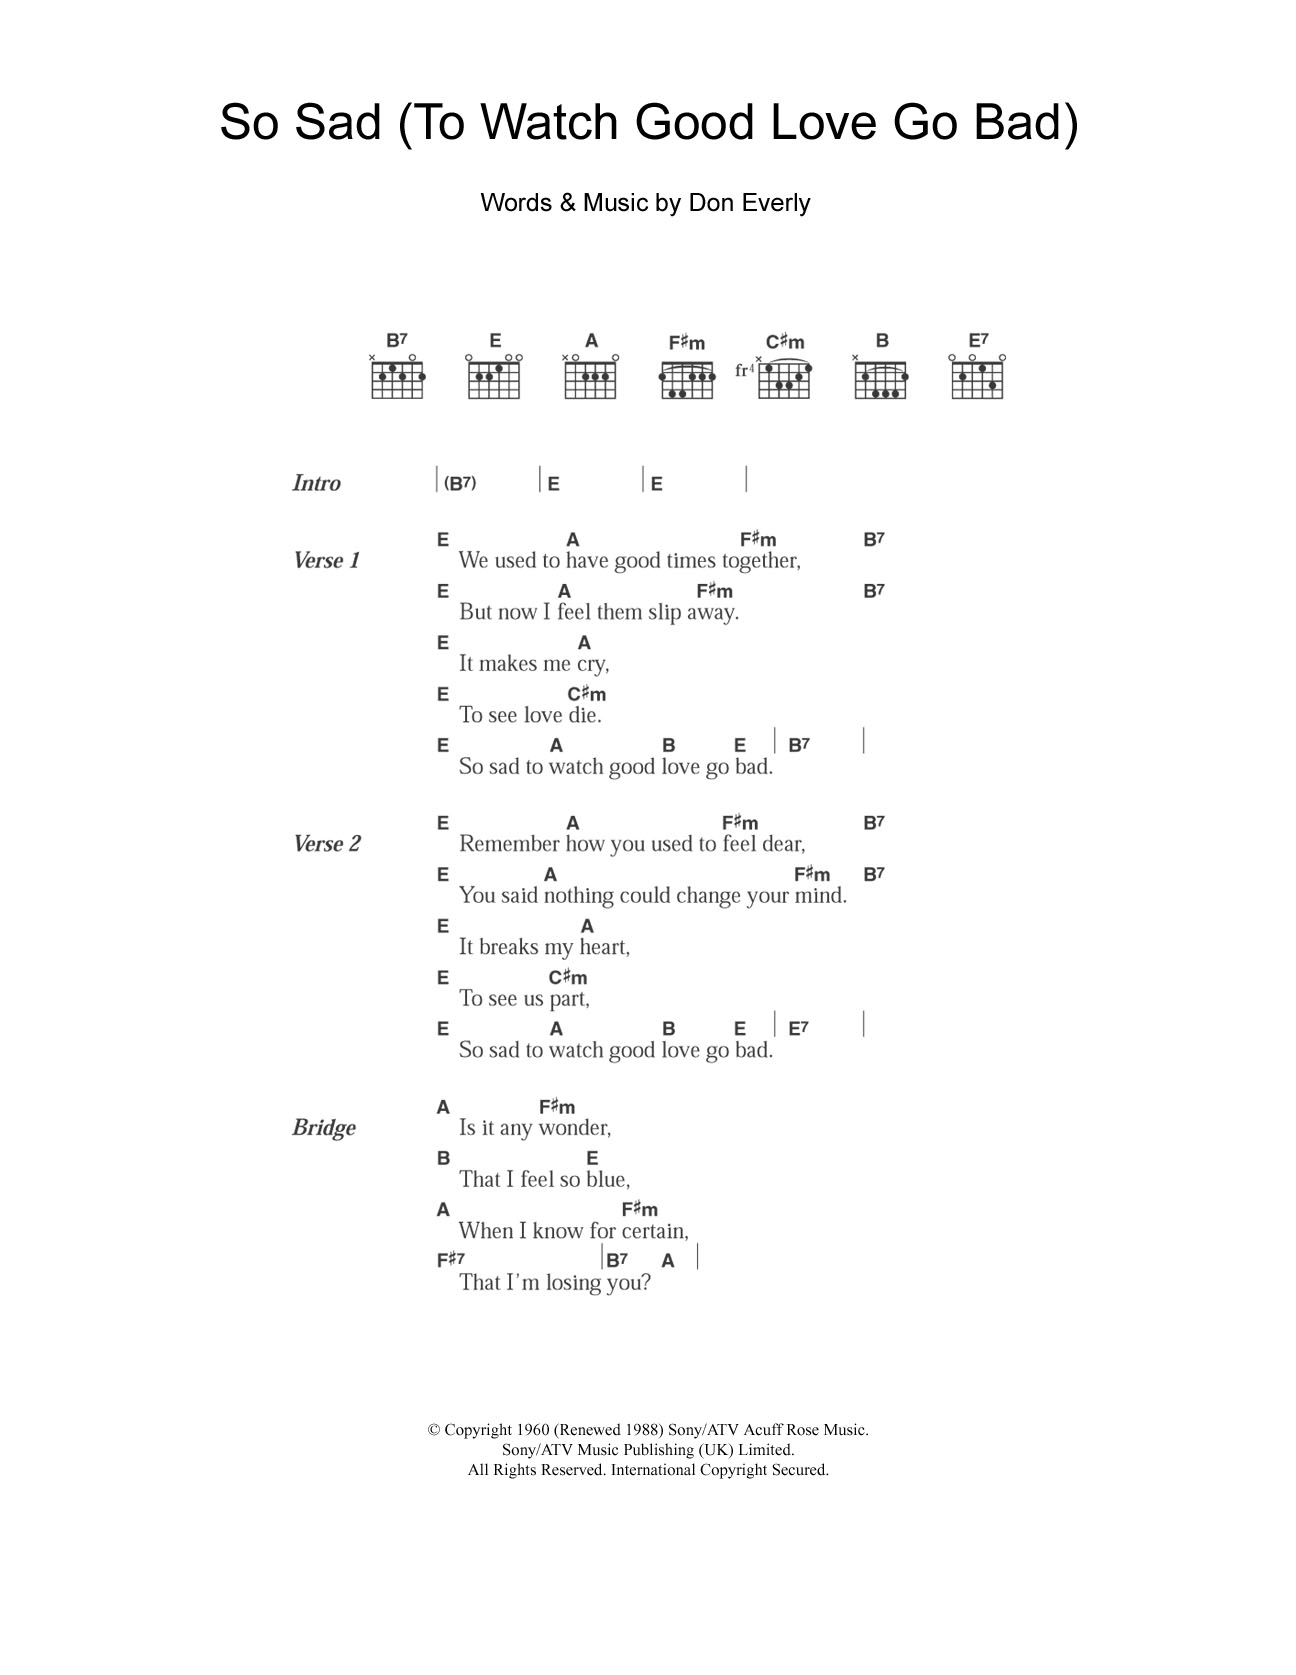 Download The Everly Brothers So Sad (To Watch Good Love Go Bad) Sheet Music